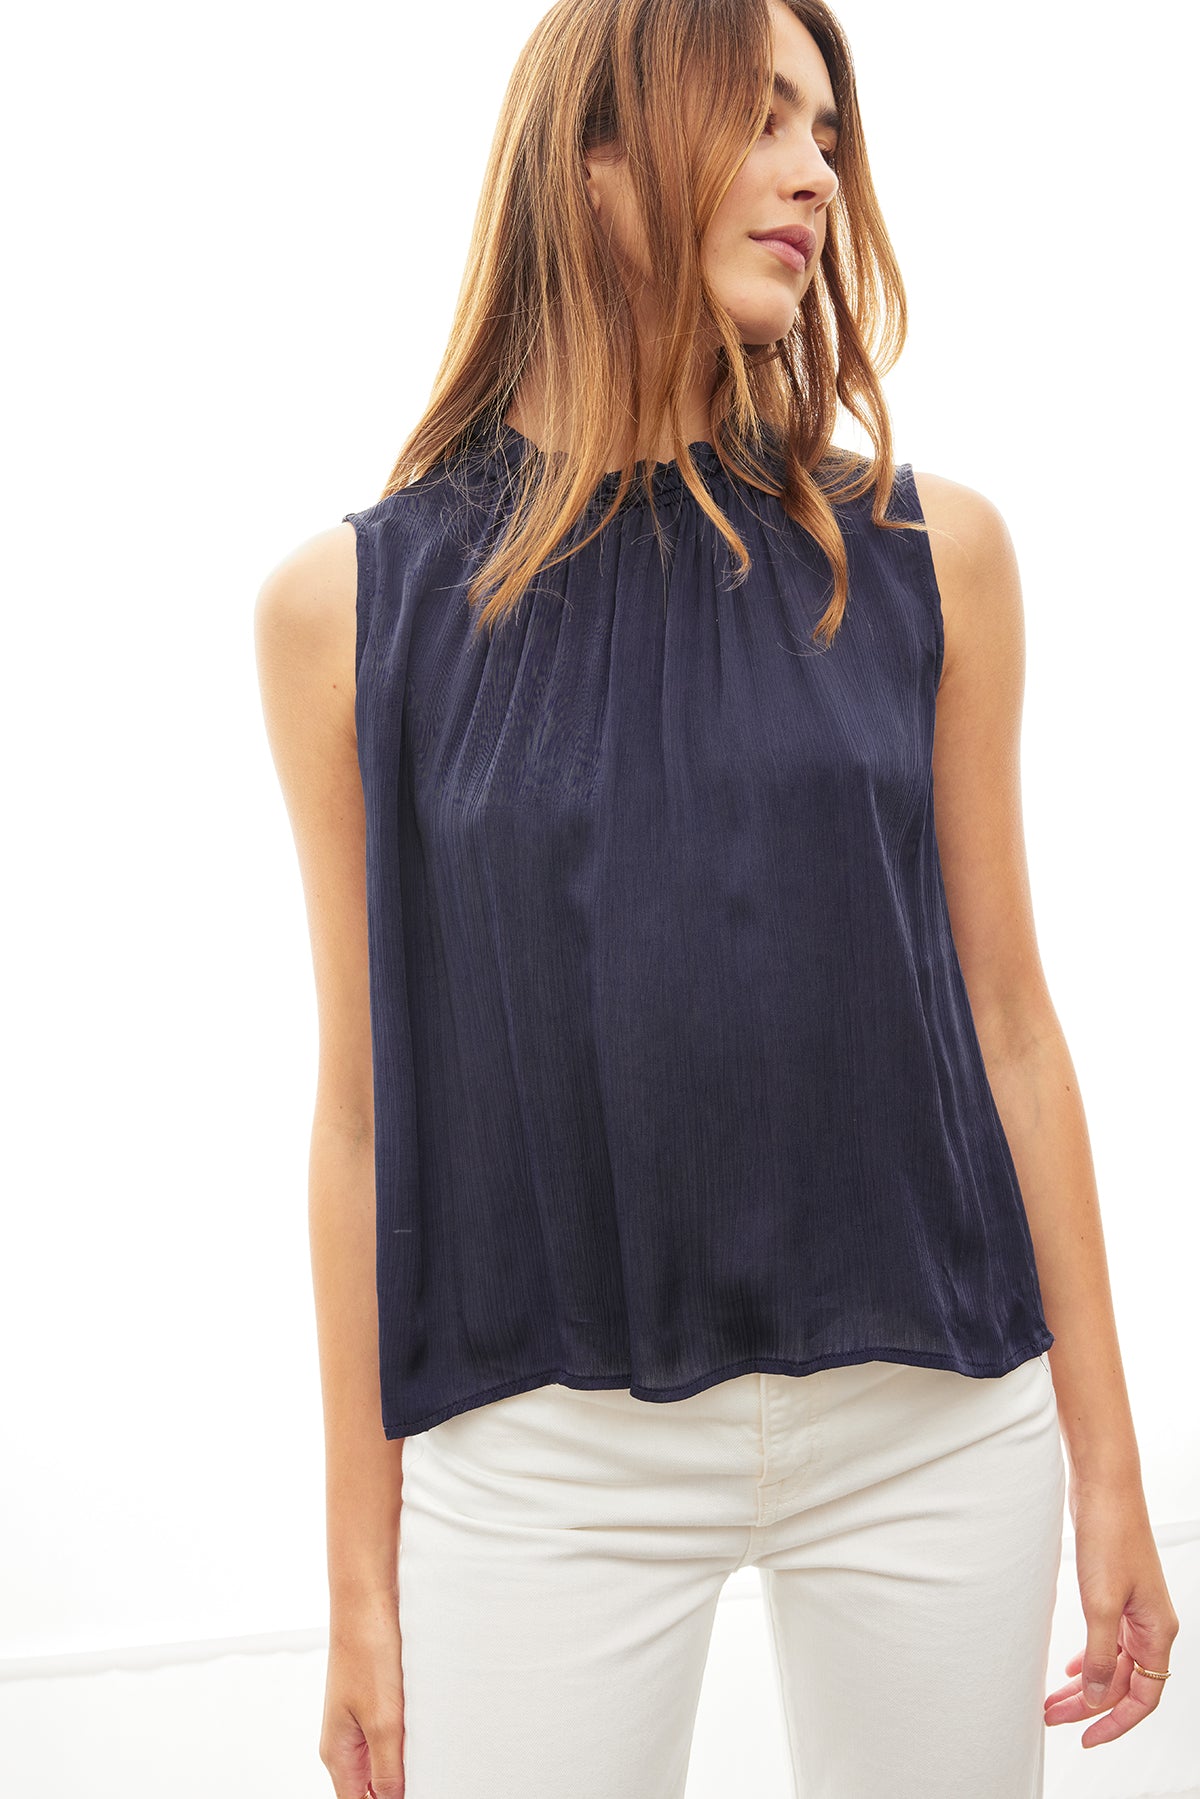   Woman in a KIANA RUFFLE NECK TANK TOP by Velvet by Graham & Spencer, navy blue tank top with an elastic ruffle neckline and white pants, standing against a white background. 